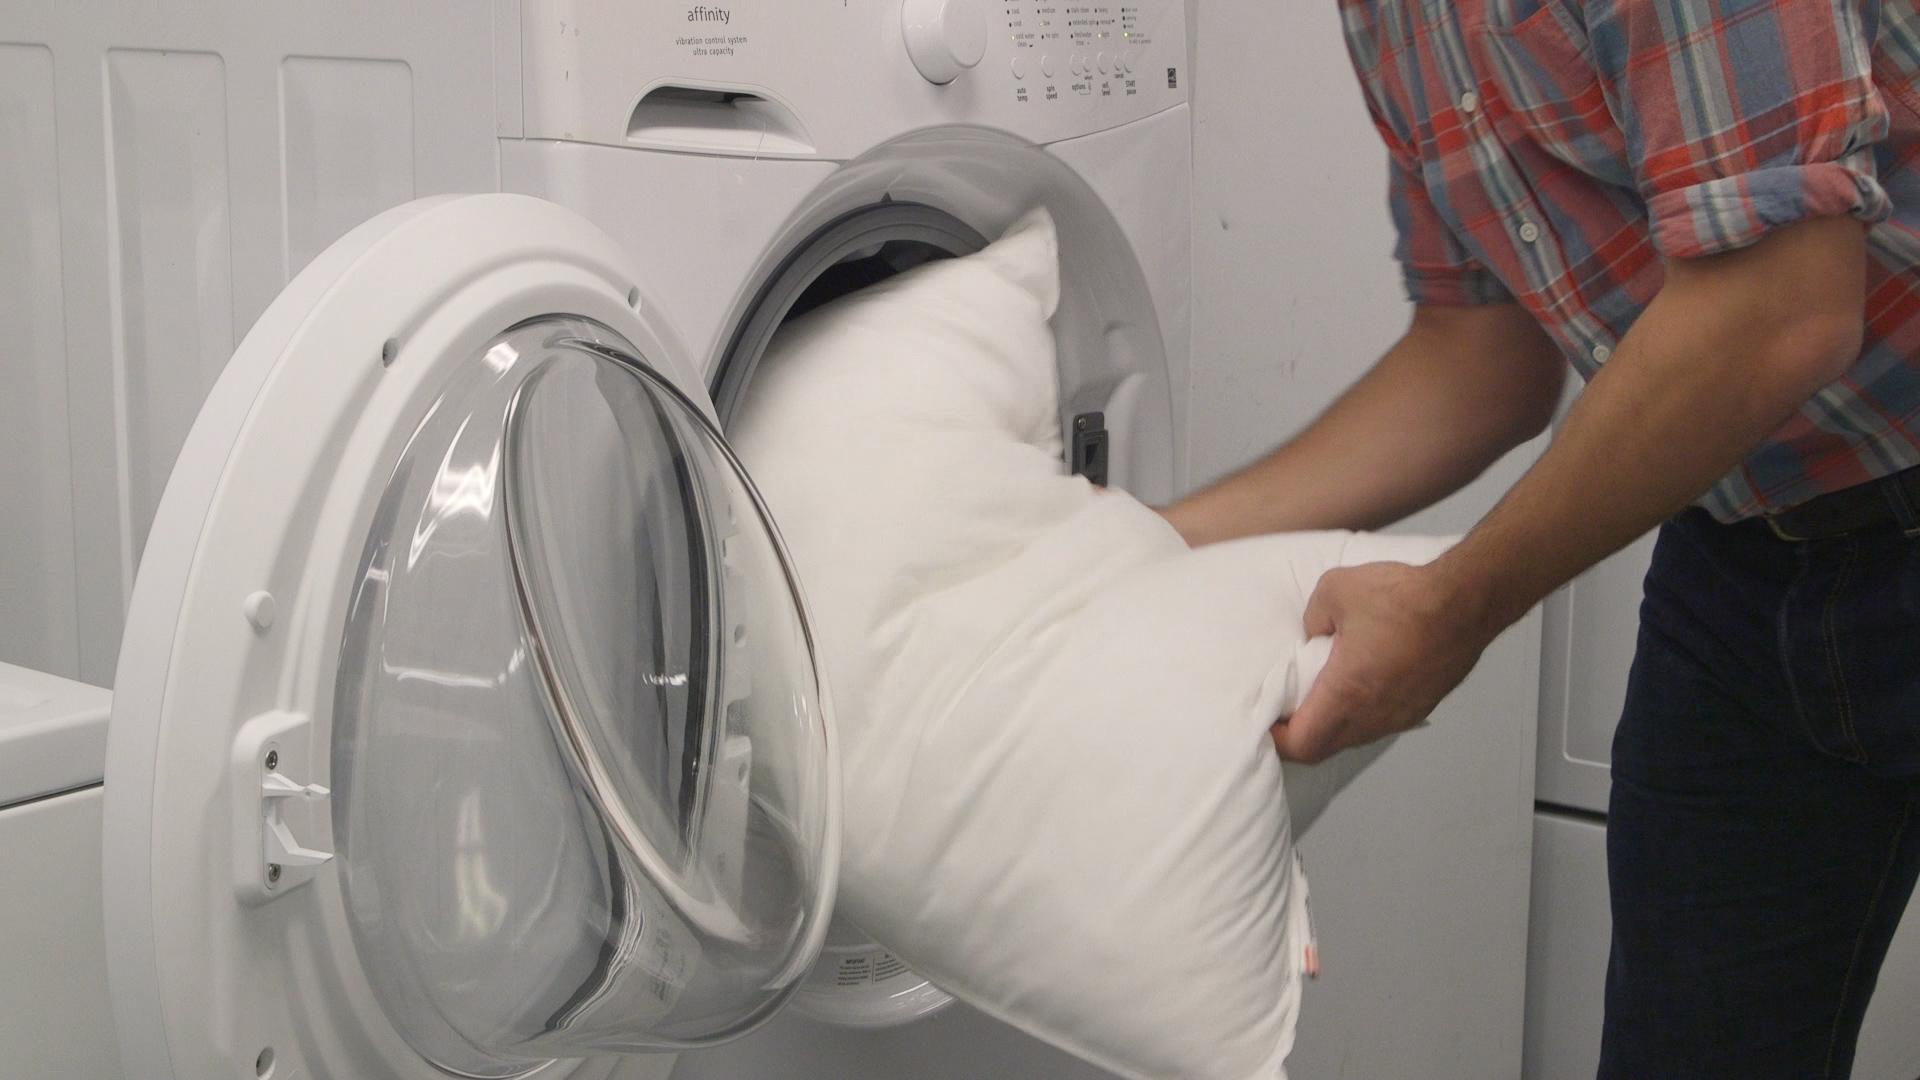 washing your cool pillows
